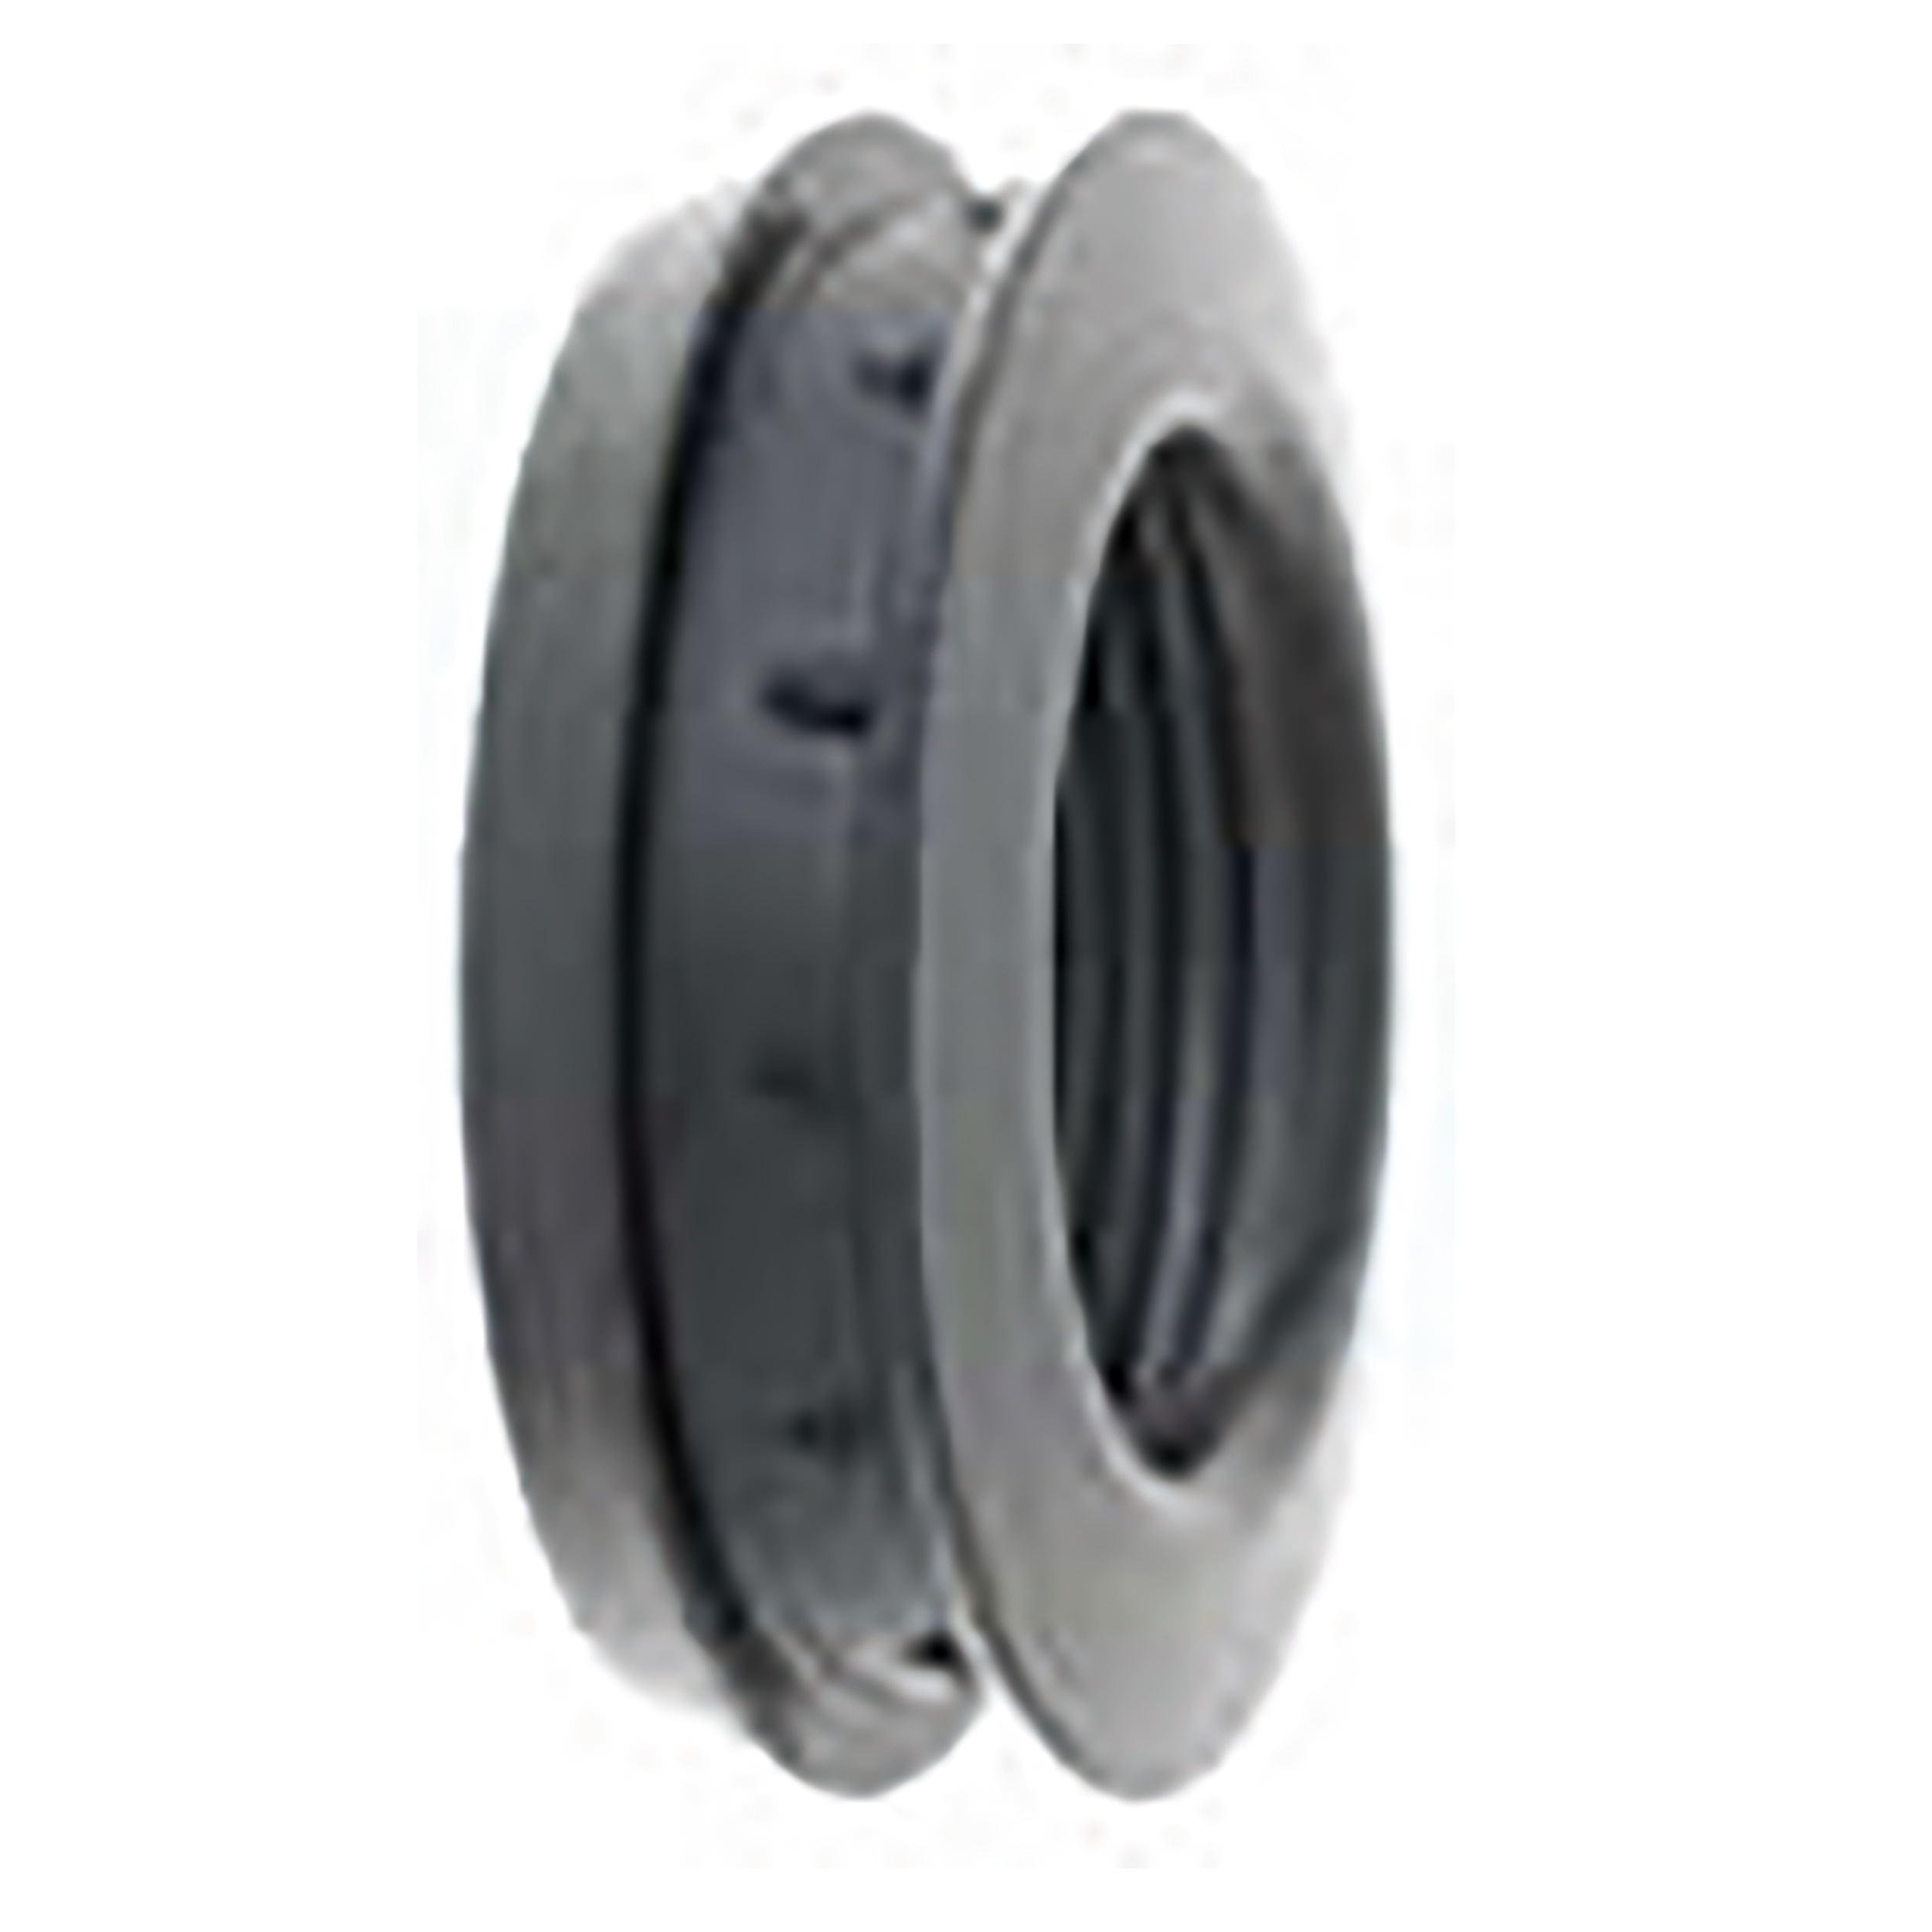 Claw coupling – high-performance moulded o-rings